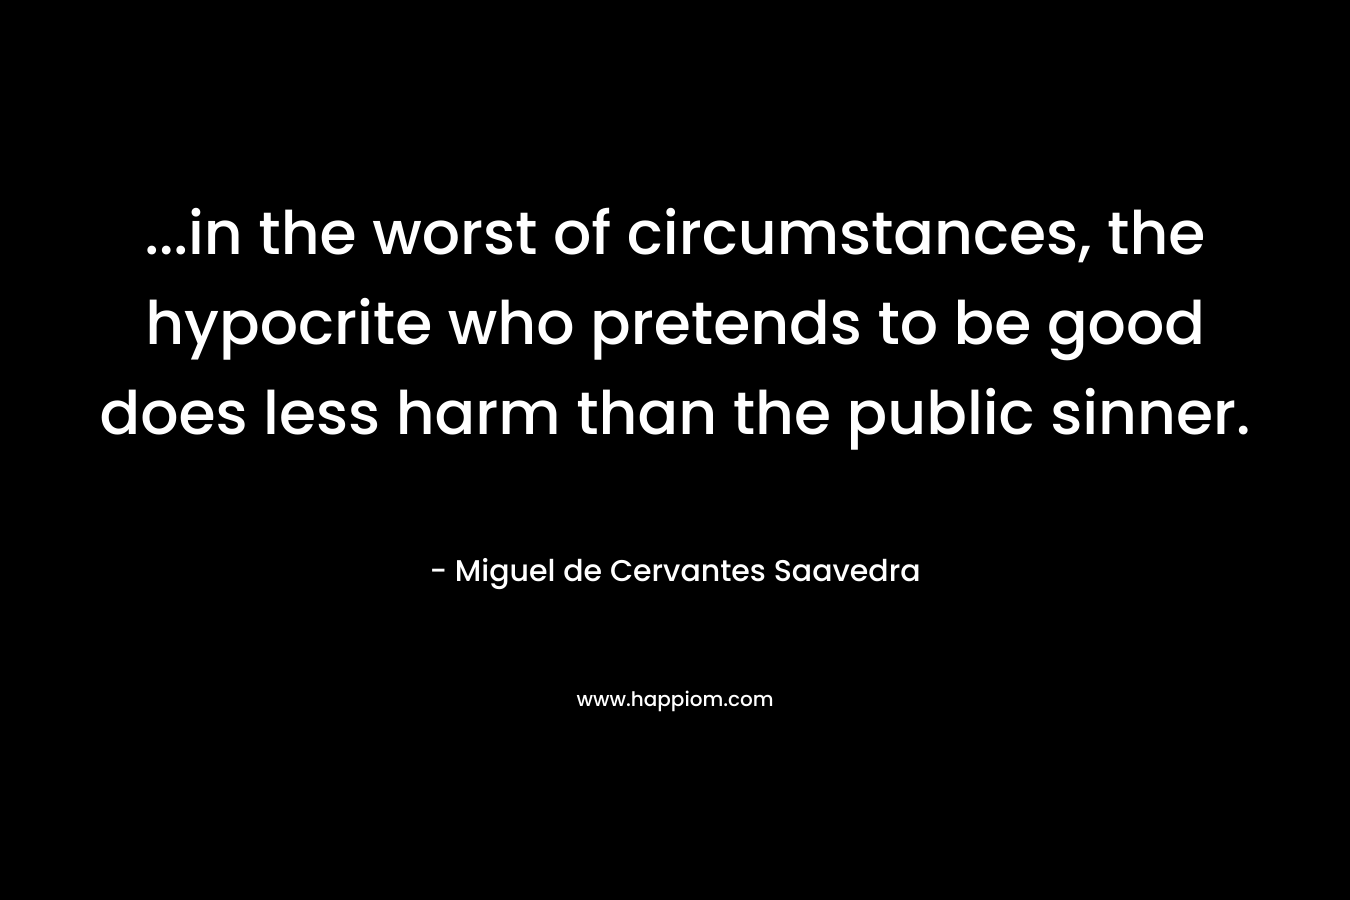 ...in the worst of circumstances, the hypocrite who pretends to be good does less harm than the public sinner.